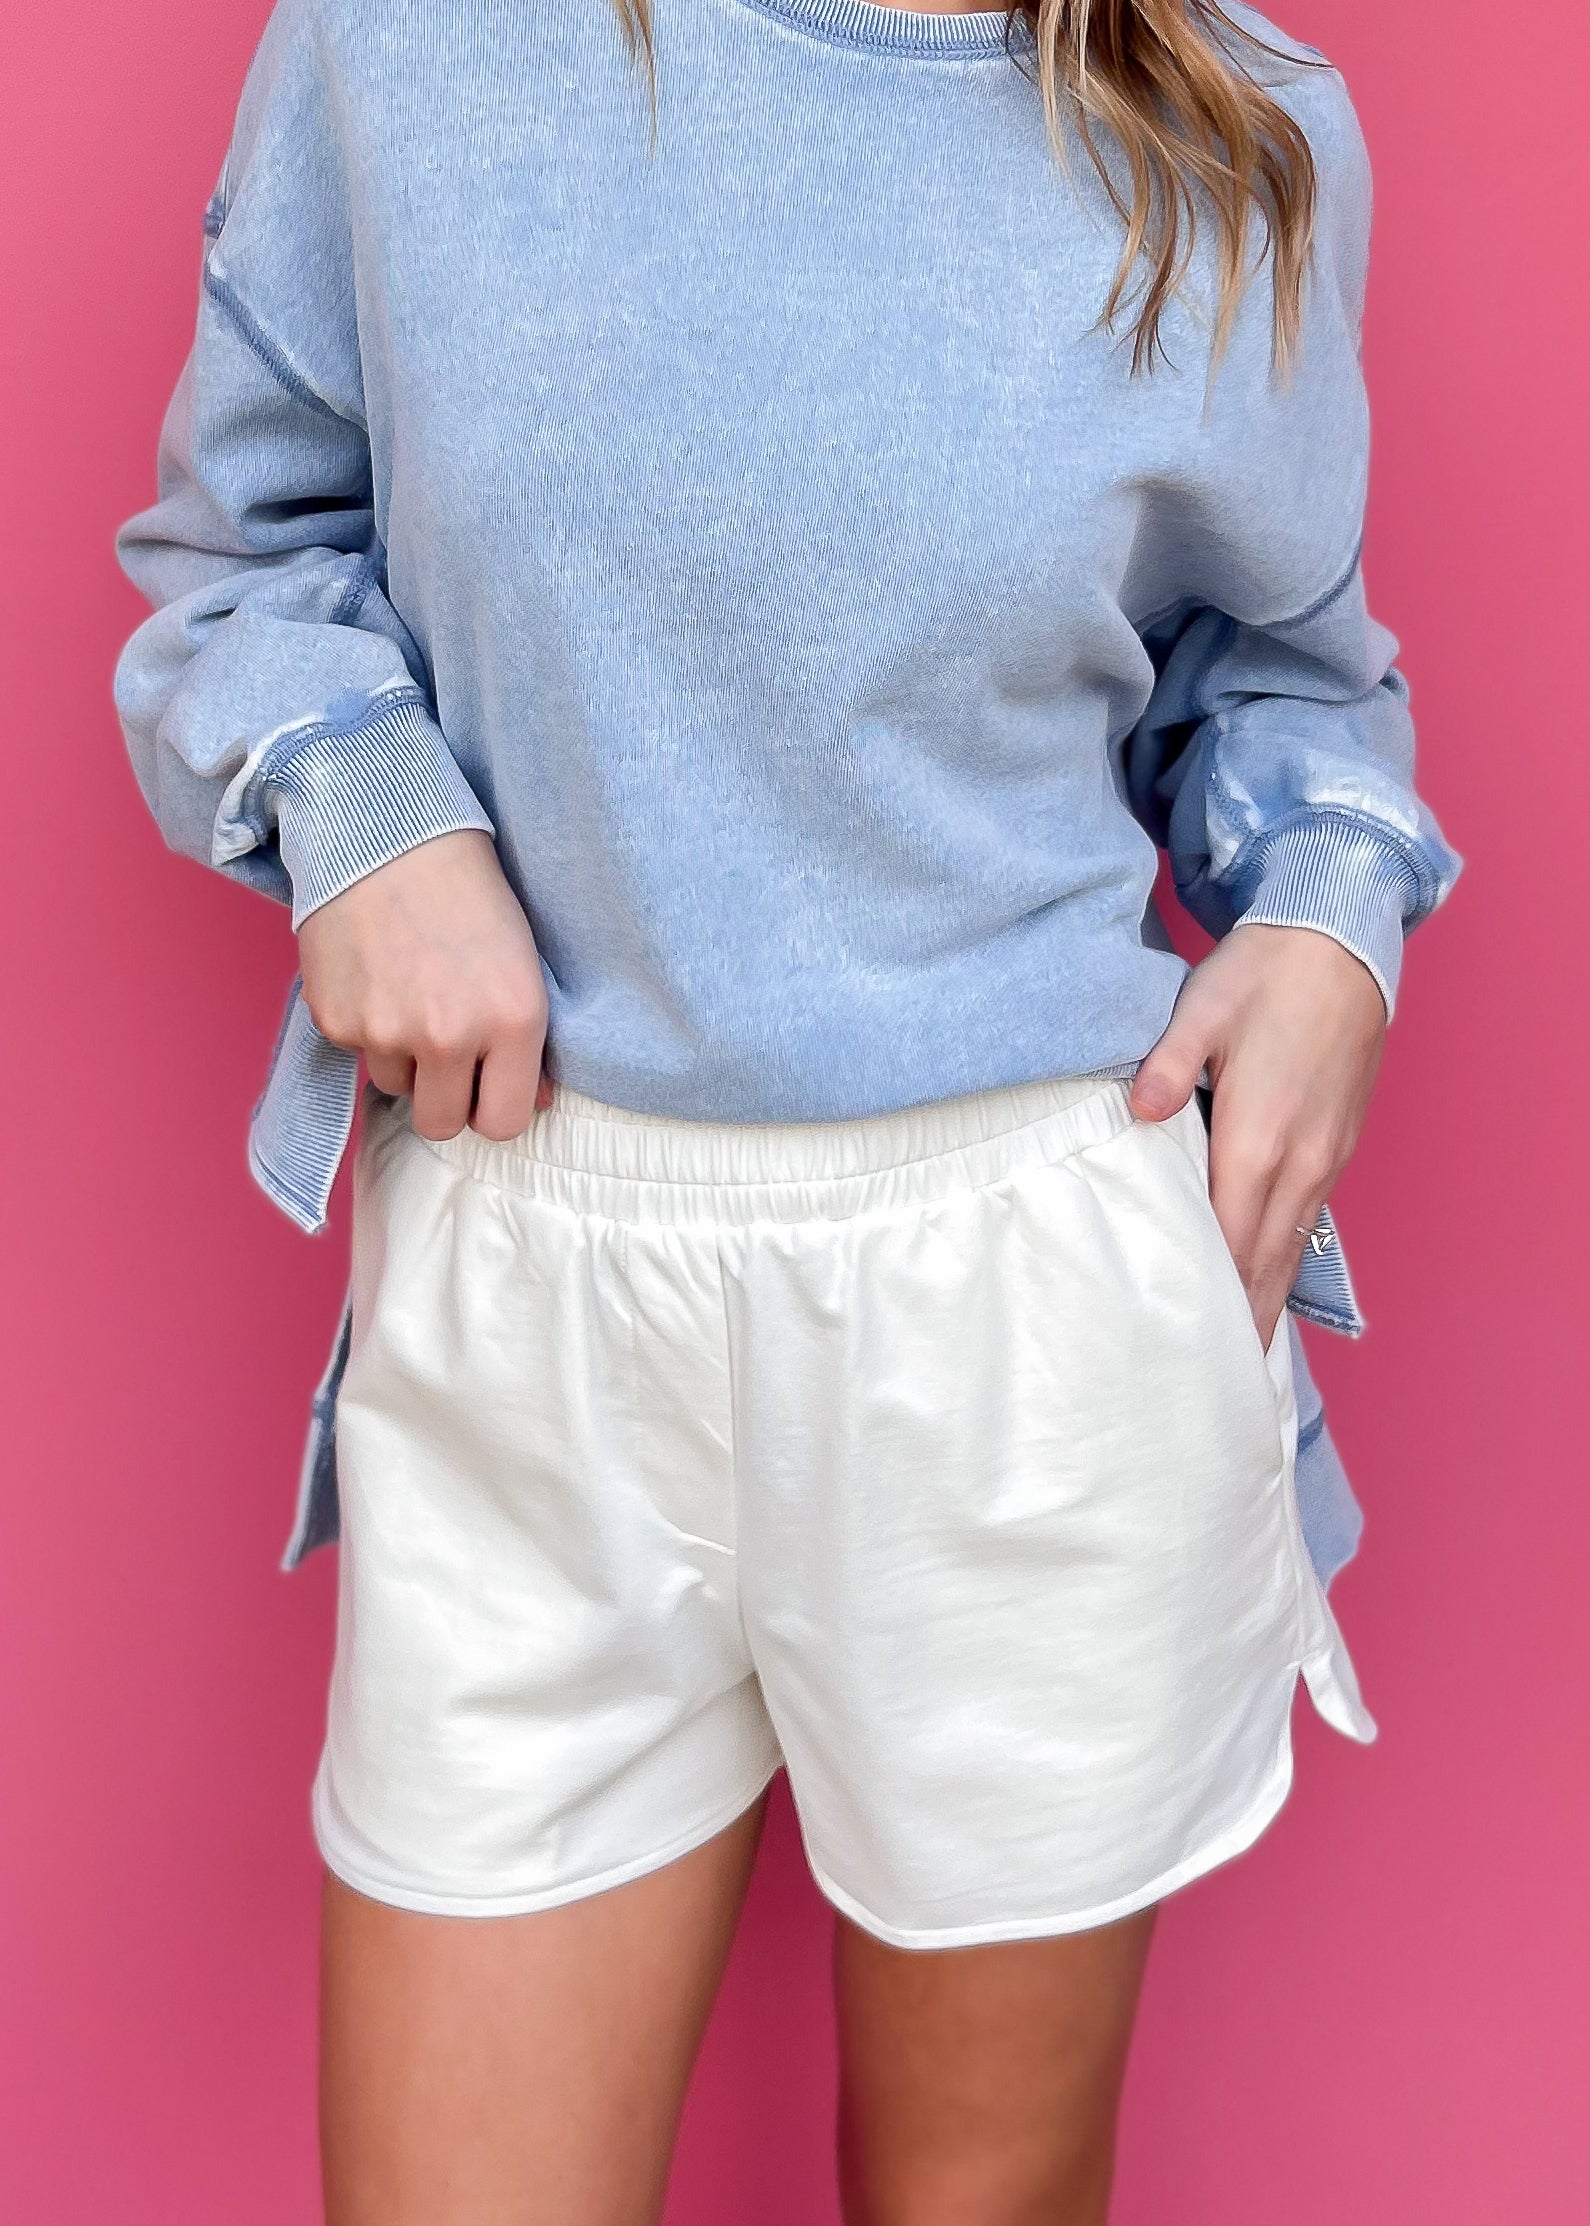 Another Love: Take On the Day Shorts